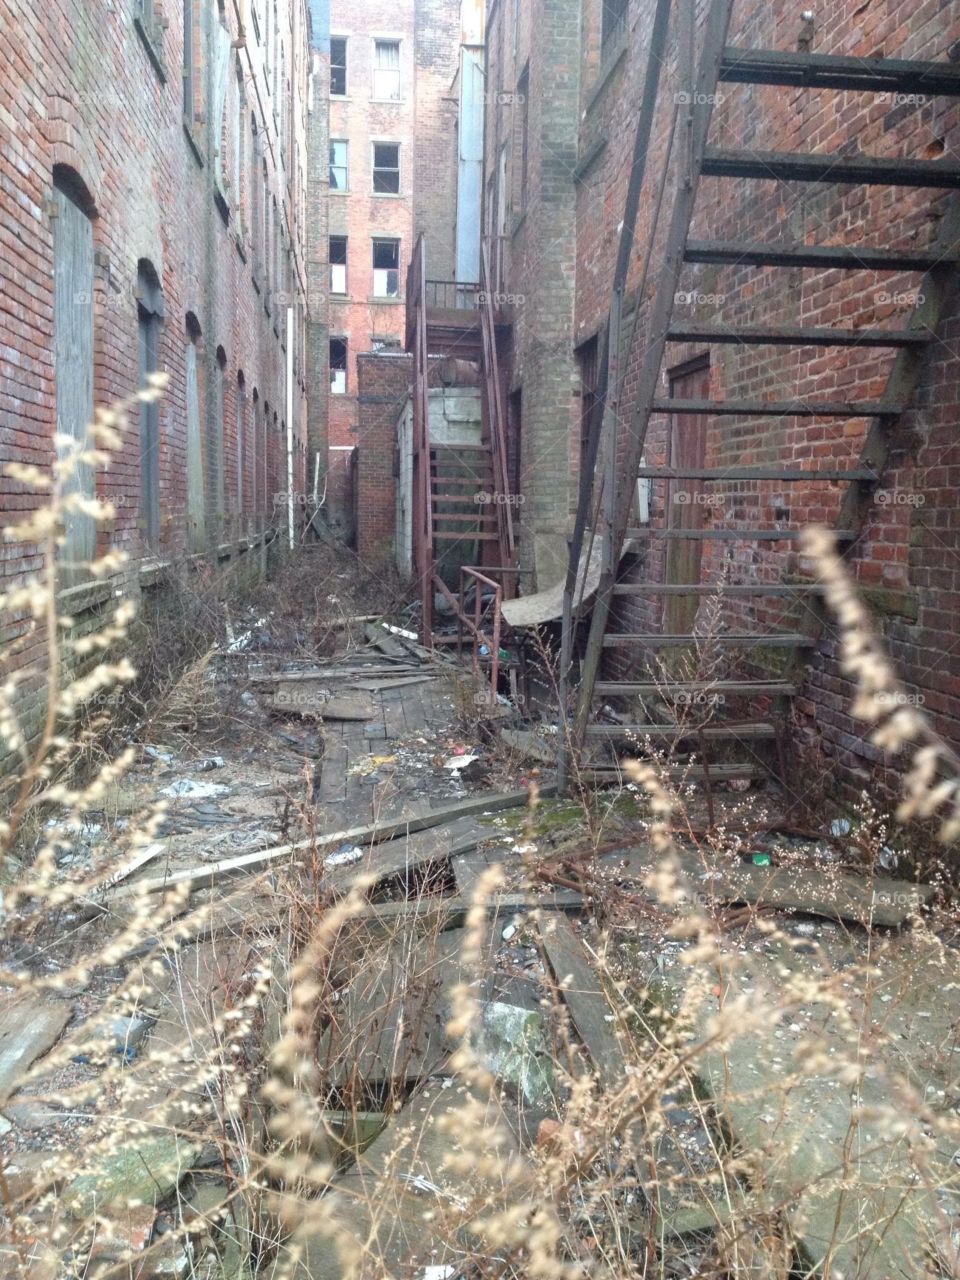 Downtown alleyway, desolate.